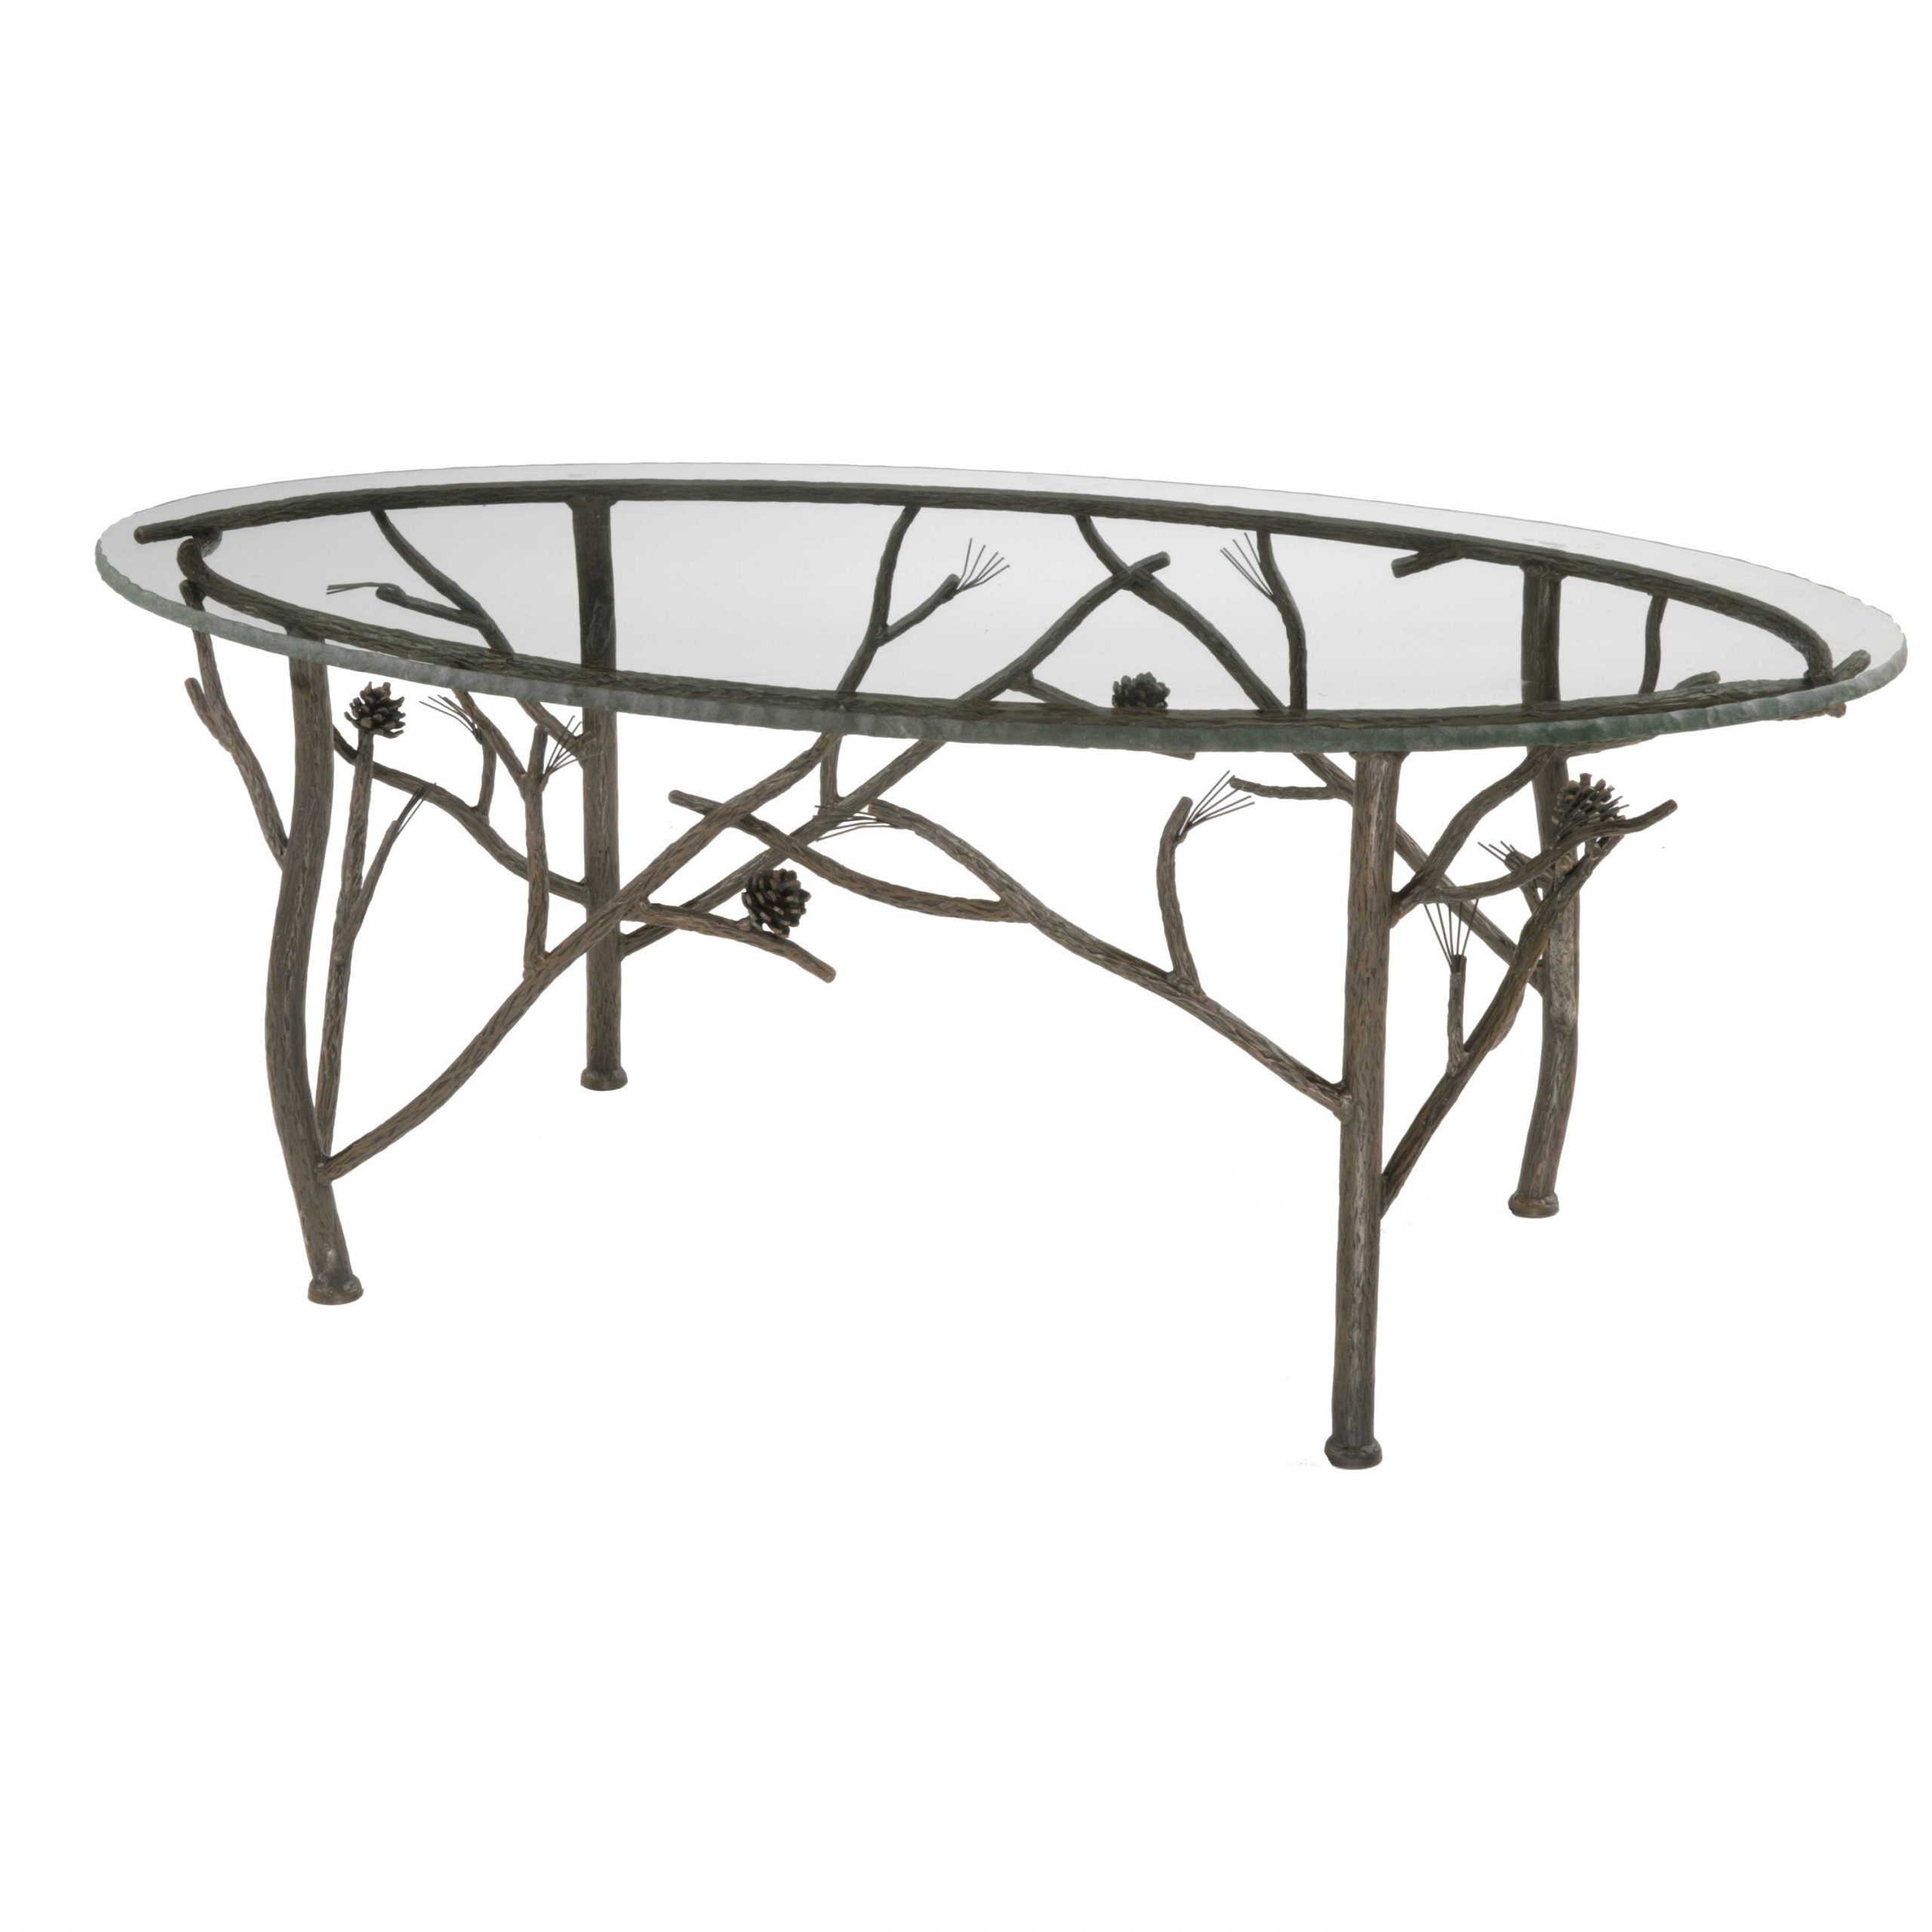 Latest Oval Aged Black Iron Coffee Tables Regarding Rustic Pine Oval Coffee Table (View 17 of 20)